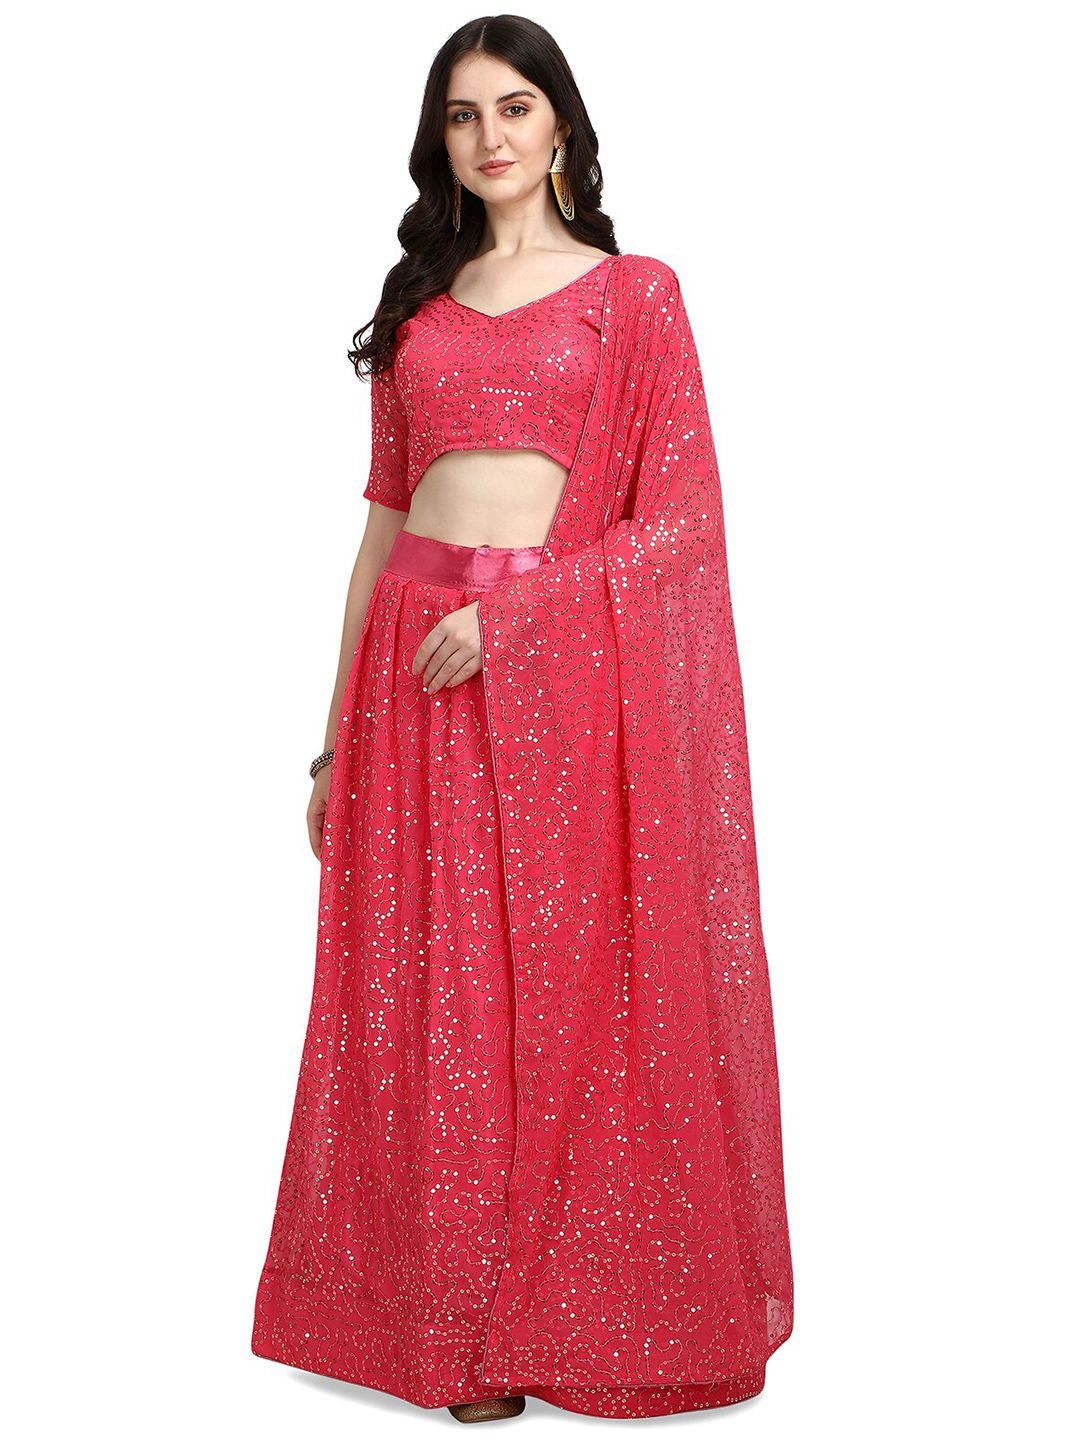 Pratham Blue Fuchsia Embroidered Sequinned Semi-Stitched Lehenga & Unstitched Blouse With Dupatta Price in India